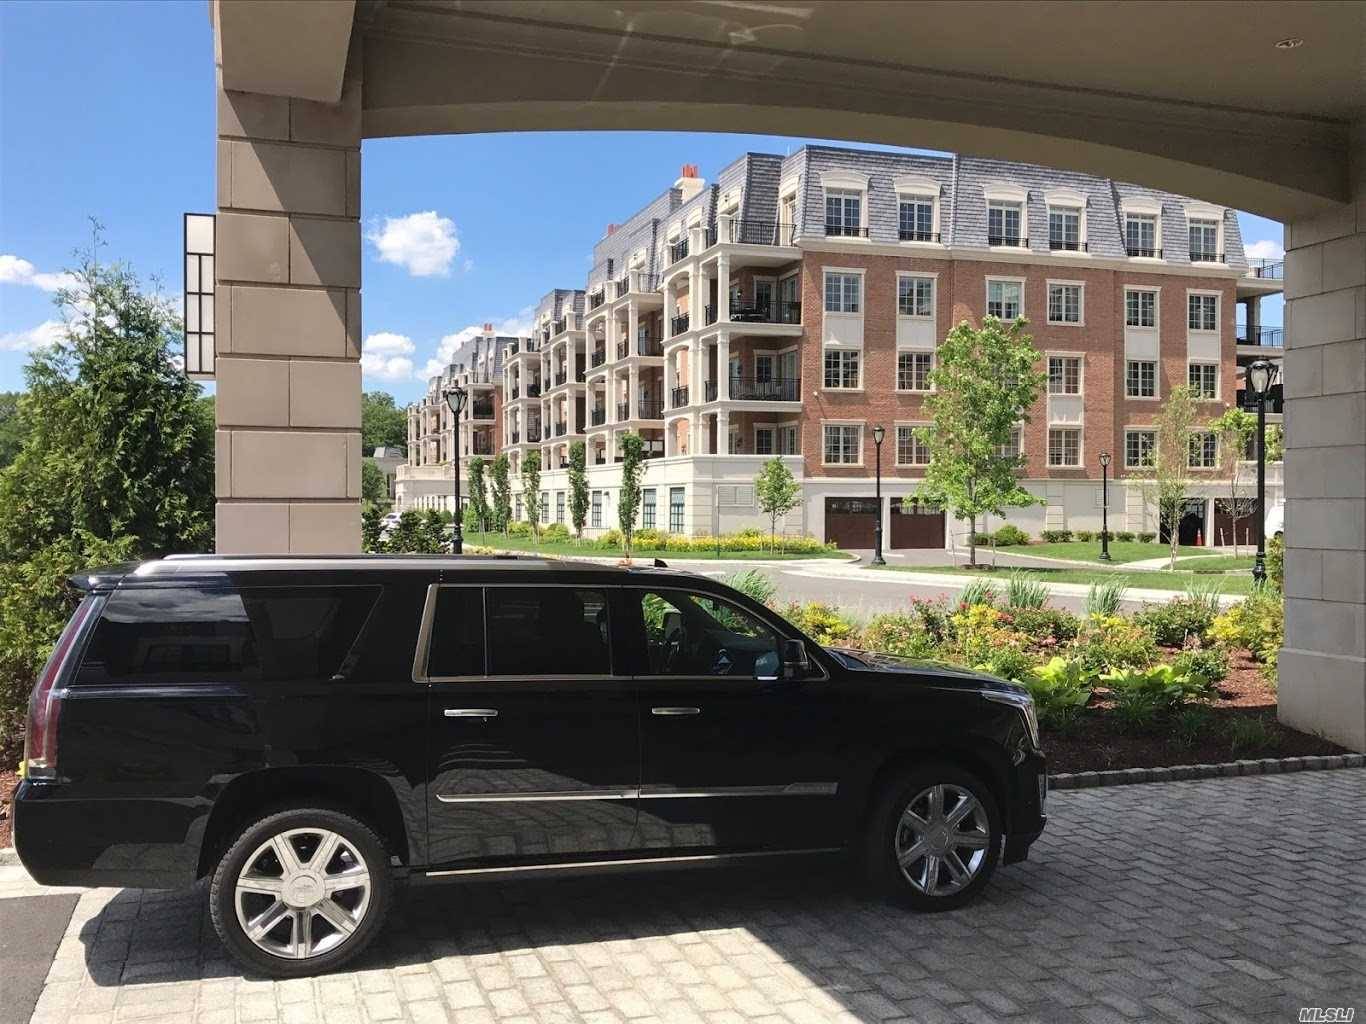 The Ritz Carlton Residences, Luxury Condominiums Set On 17 Beautifully Landscaped Acres Within The Village Of North Hills, 20 Miles From Manhattan, 60 Miles From The Hamptons.